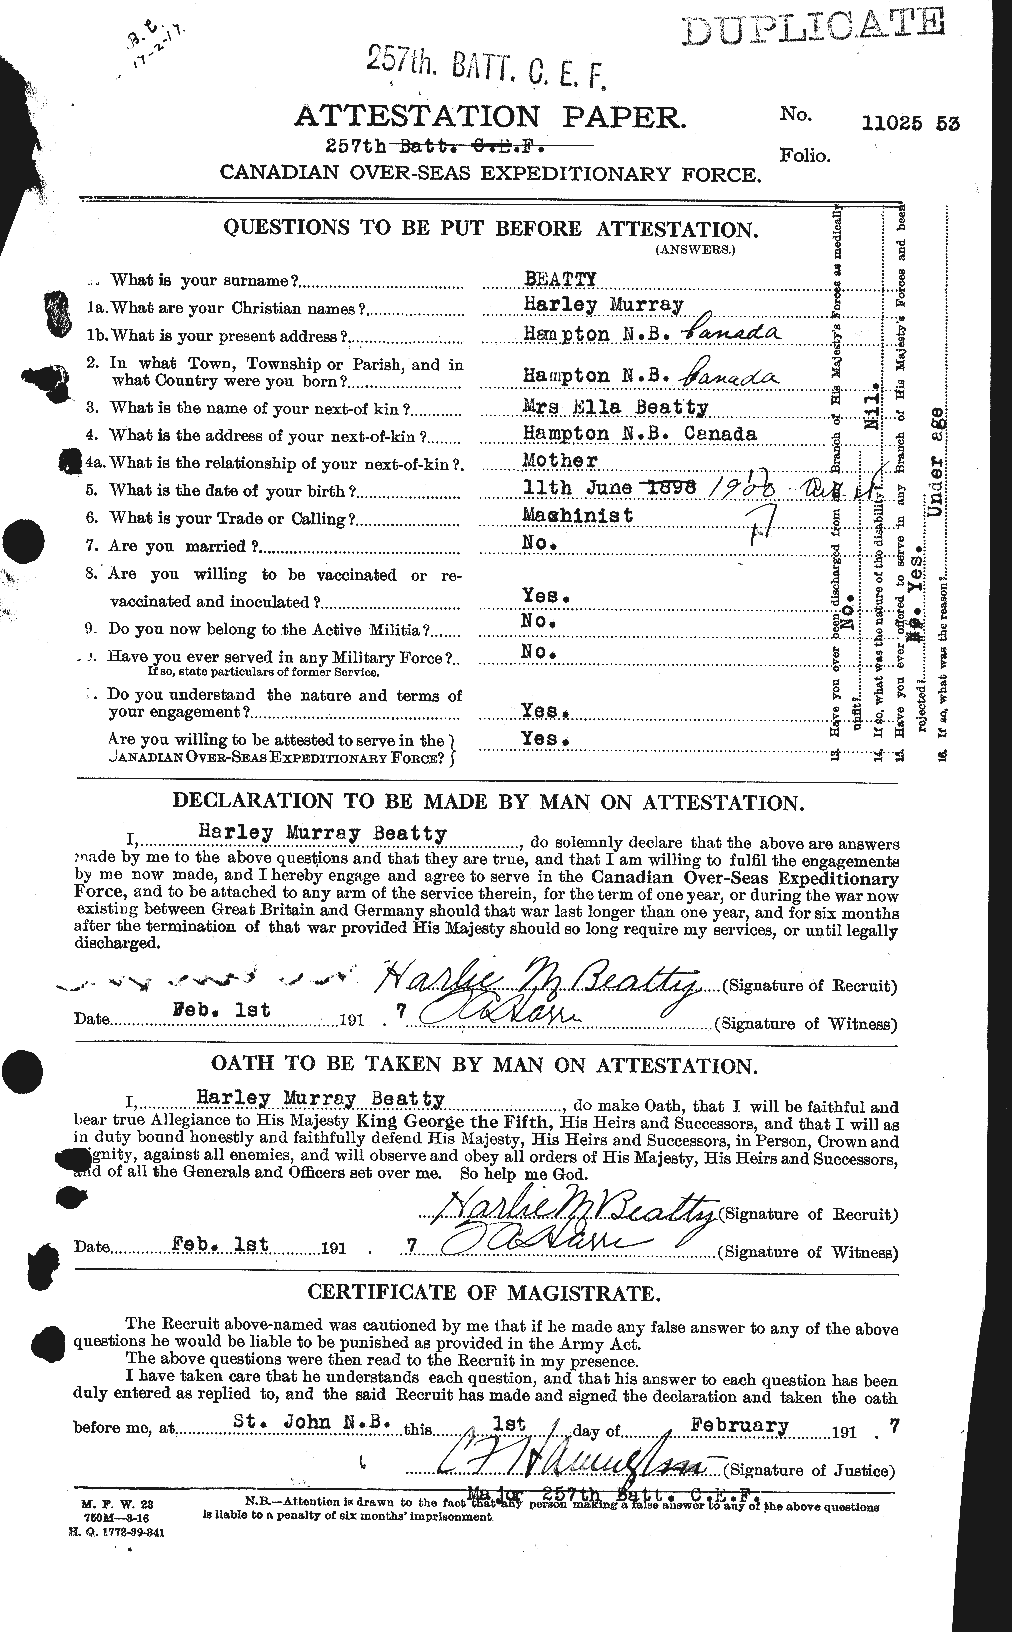 Personnel Records of the First World War - CEF 236379a